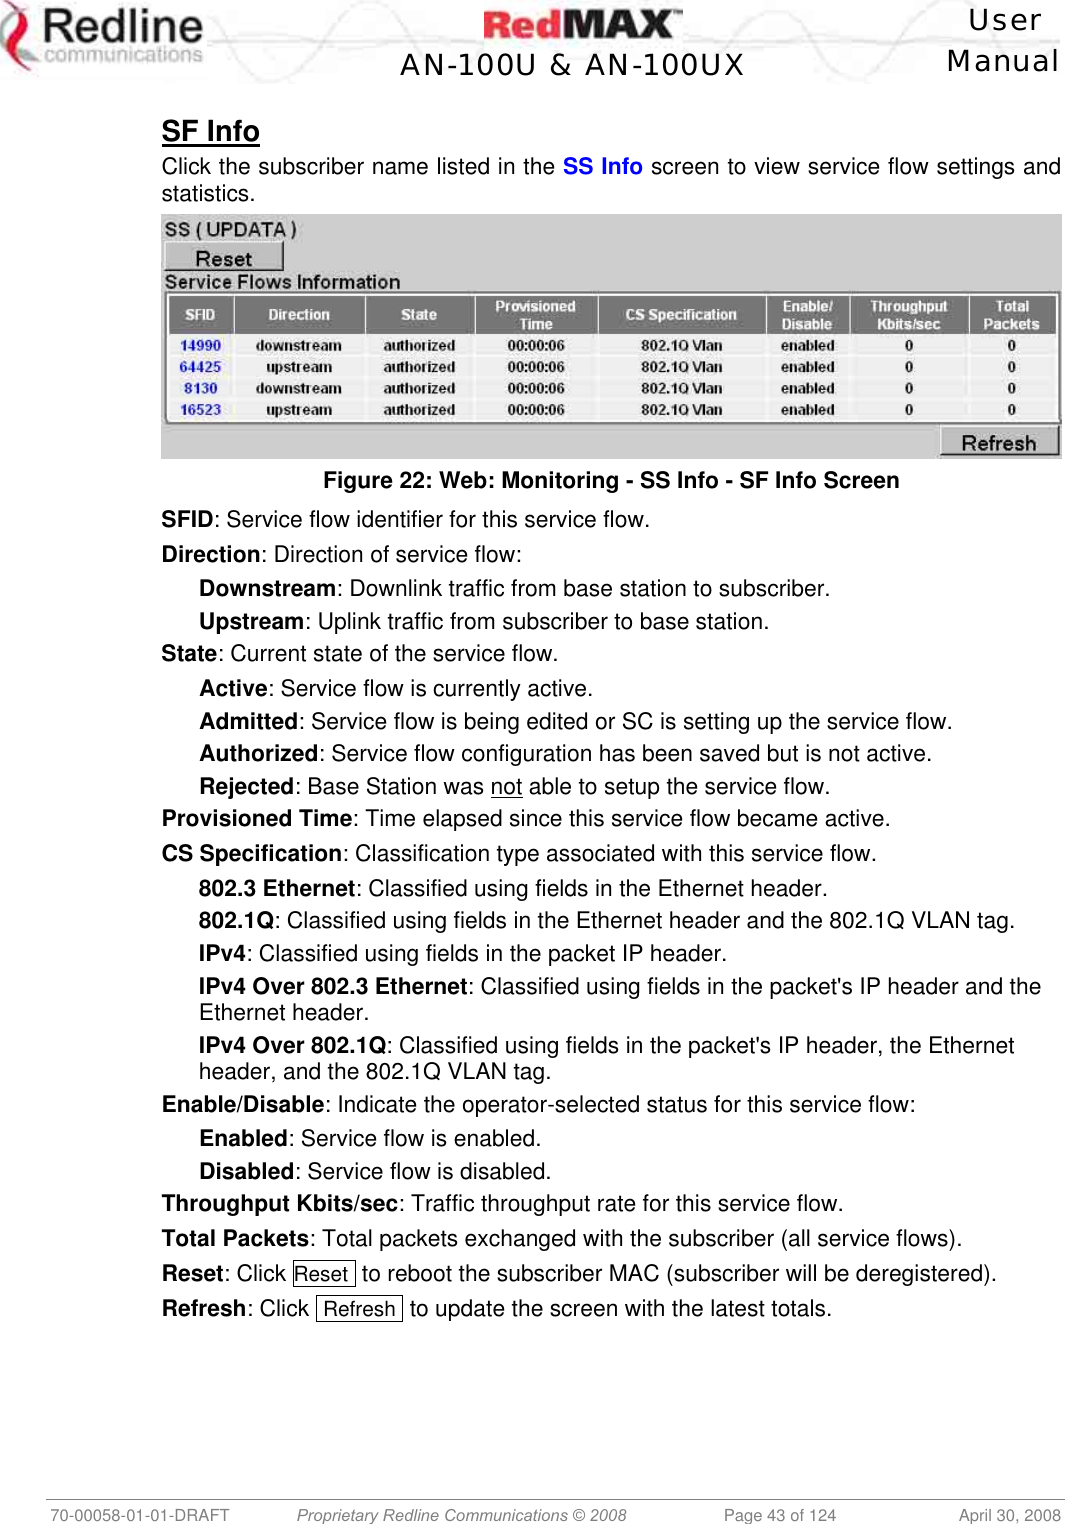    User  AN-100U &amp; AN-100UX Manual   70-00058-01-01-DRAFT  Proprietary Redline Communications © 2008   Page 43 of 124  April 30, 2008  SF Info Click the subscriber name listed in the SS Info screen to view service flow settings and statistics.  Figure 22: Web: Monitoring - SS Info - SF Info Screen SFID: Service flow identifier for this service flow. Direction: Direction of service flow: Downstream: Downlink traffic from base station to subscriber. Upstream: Uplink traffic from subscriber to base station. State: Current state of the service flow. Active: Service flow is currently active. Admitted: Service flow is being edited or SC is setting up the service flow. Authorized: Service flow configuration has been saved but is not active. Rejected: Base Station was not able to setup the service flow. Provisioned Time: Time elapsed since this service flow became active. CS Specification: Classification type associated with this service flow. 802.3 Ethernet: Classified using fields in the Ethernet header. 802.1Q: Classified using fields in the Ethernet header and the 802.1Q VLAN tag. IPv4: Classified using fields in the packet IP header. IPv4 Over 802.3 Ethernet: Classified using fields in the packet&apos;s IP header and the Ethernet header. IPv4 Over 802.1Q: Classified using fields in the packet&apos;s IP header, the Ethernet header, and the 802.1Q VLAN tag. Enable/Disable: Indicate the operator-selected status for this service flow: Enabled: Service flow is enabled. Disabled: Service flow is disabled. Throughput Kbits/sec: Traffic throughput rate for this service flow. Total Packets: Total packets exchanged with the subscriber (all service flows). Reset: Click Reset  to reboot the subscriber MAC (subscriber will be deregistered). Refresh: Click  Refresh  to update the screen with the latest totals. 